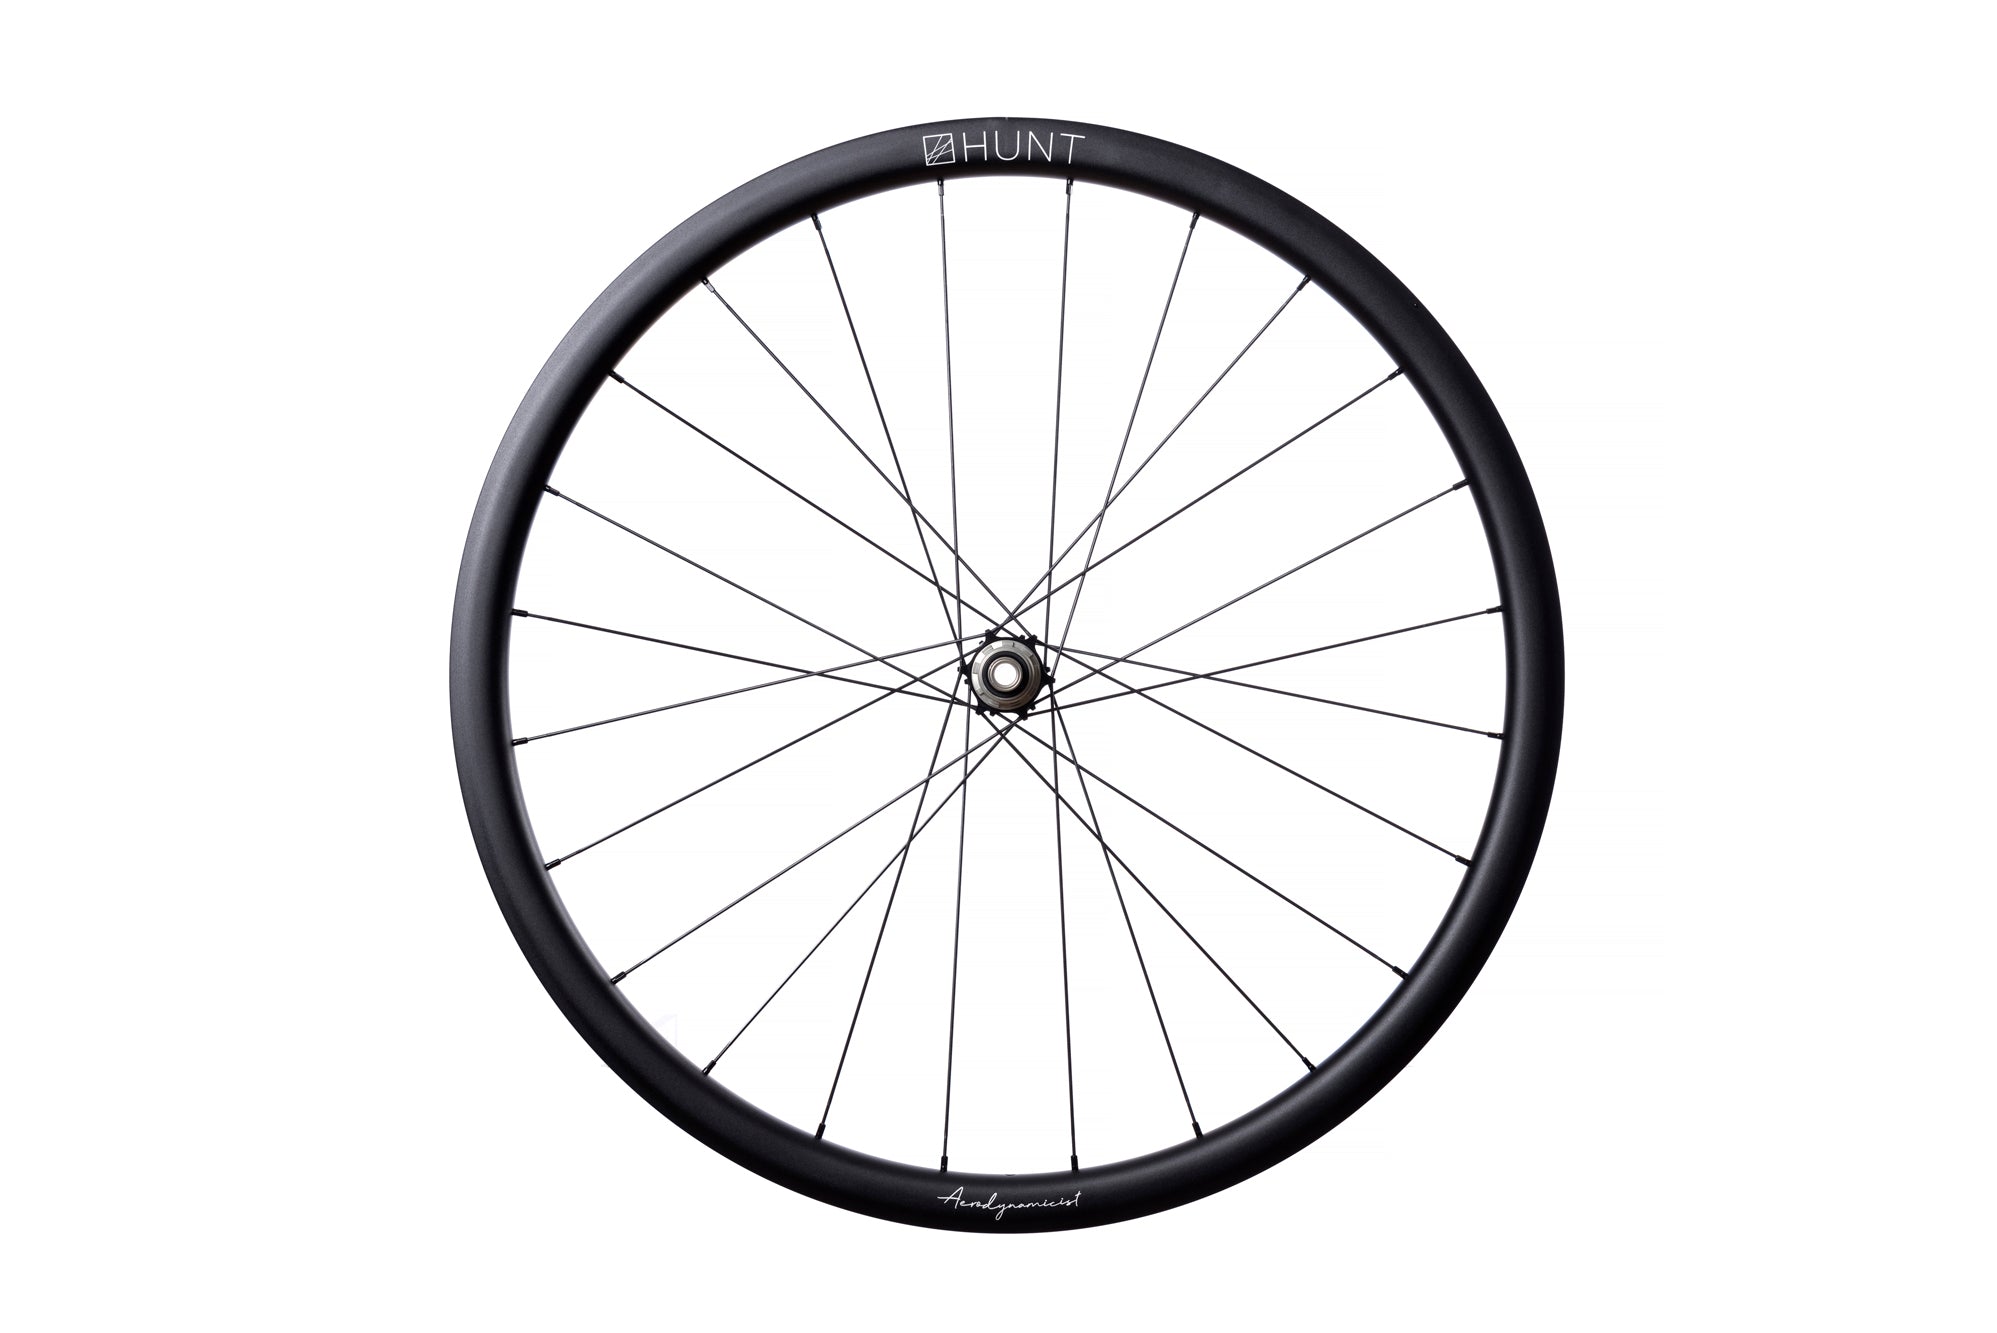 <h1>Rims</h1><i>To achieve the wide profile, yet also create a lightweight 1548g high performance wheelset, 6069-T6 alloy was the right choice. It has a 69% higher Ultimate Tensile Strength (480 Mega Pascals), than the 6061-T6 alloy (280 MPa) often used in performance road rims.</i>